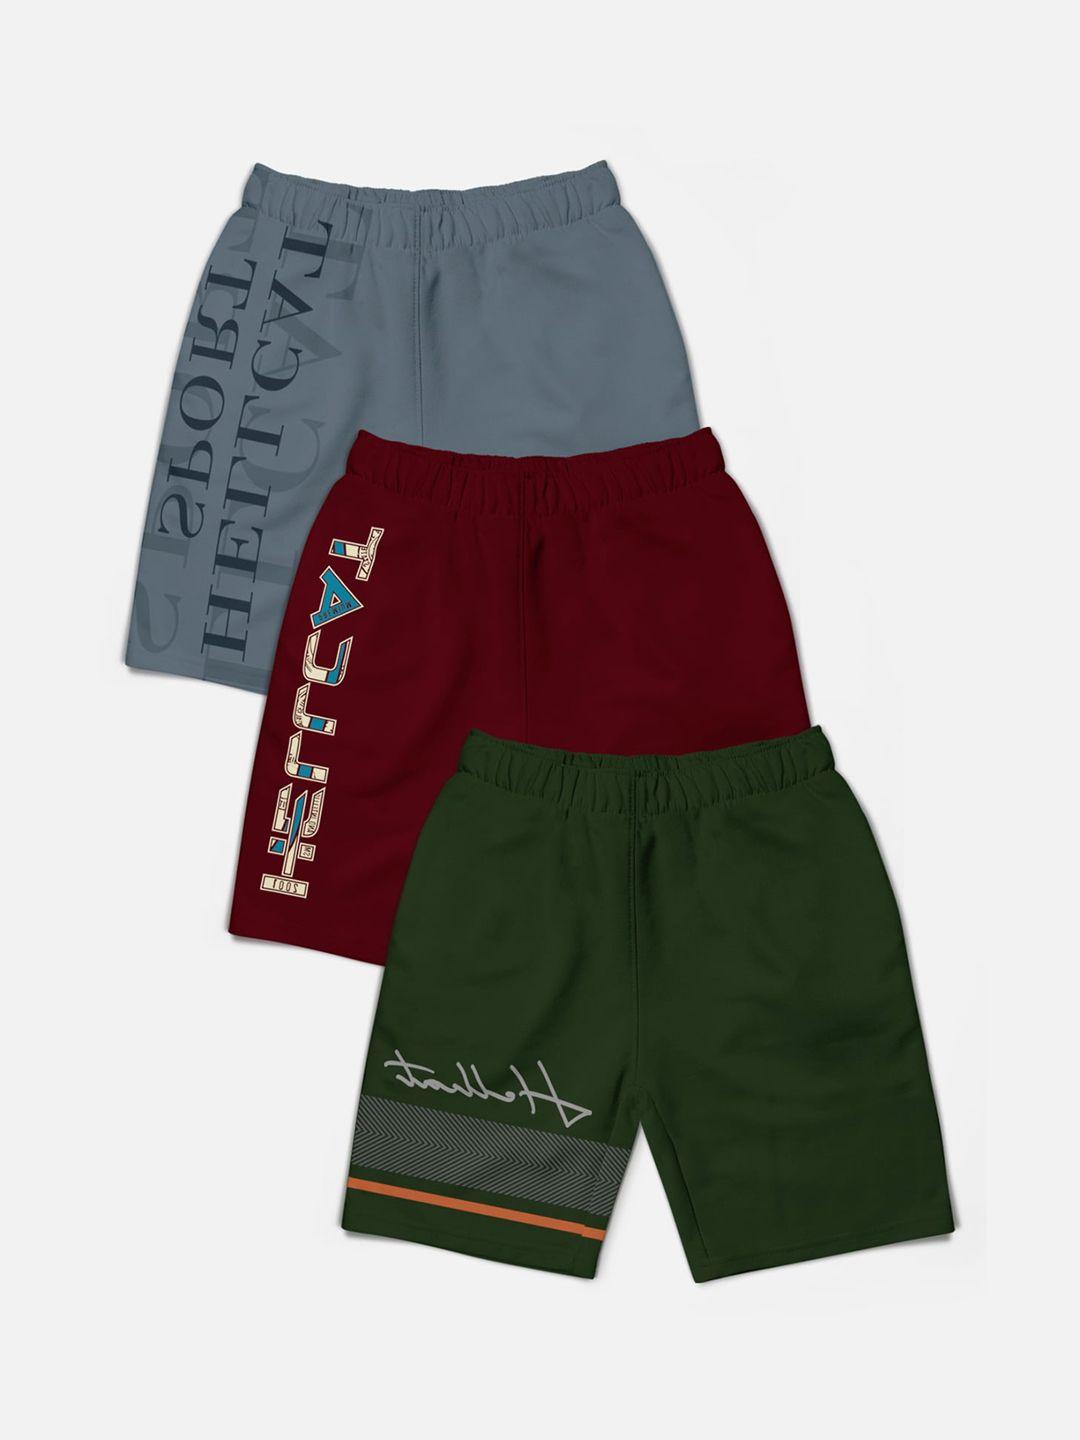 hellcat boys pack of 3 typography printed shorts